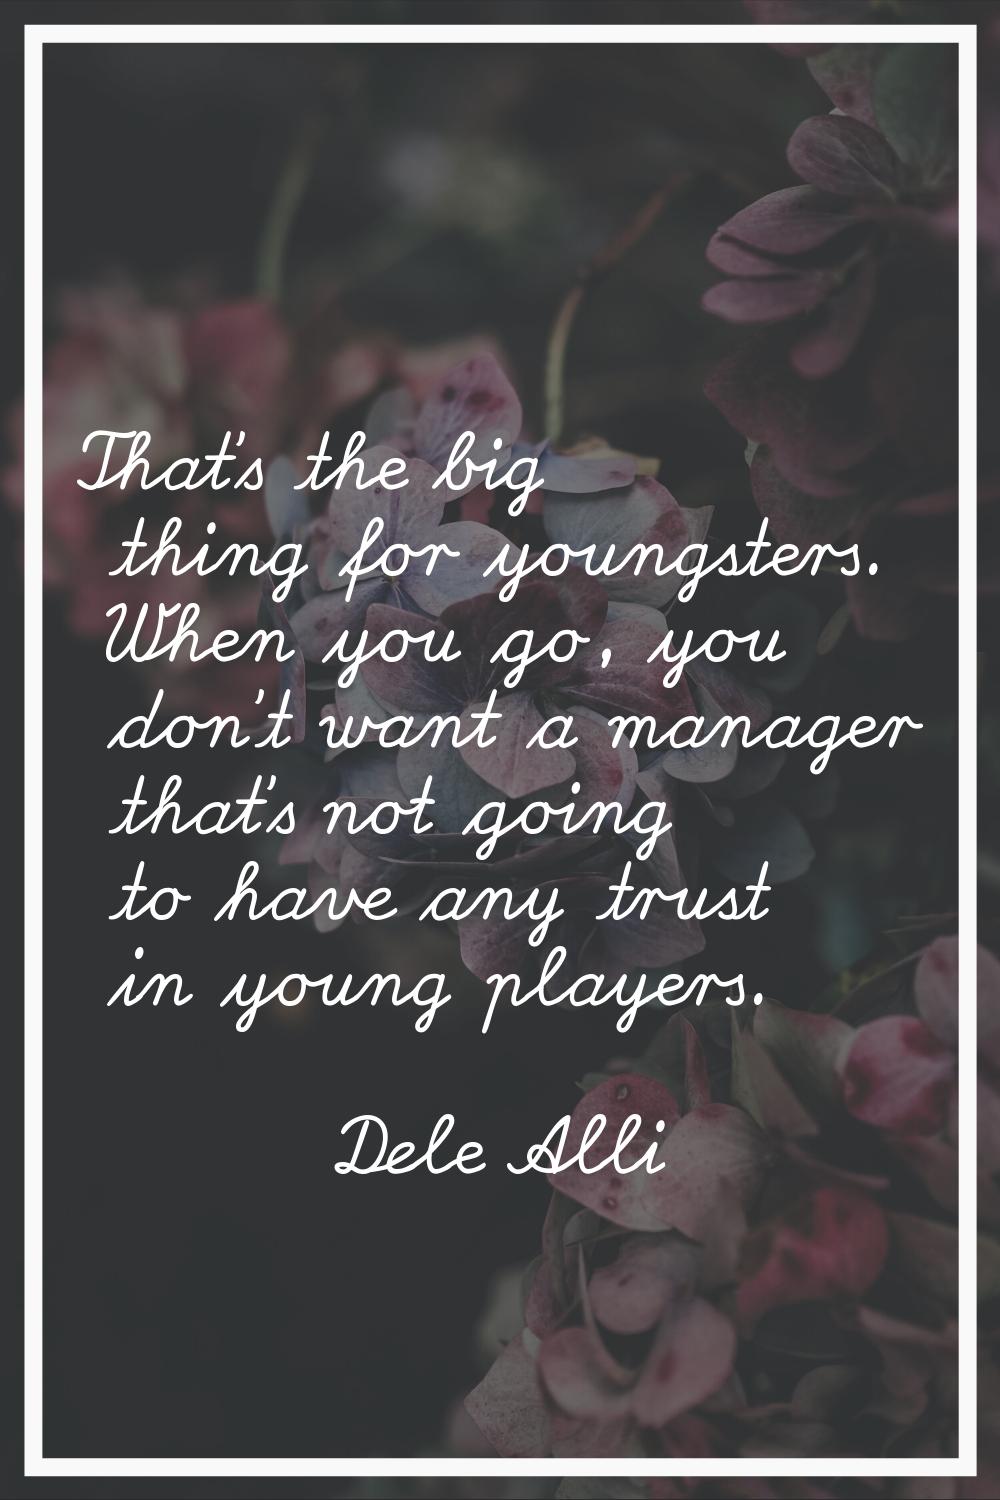 That's the big thing for youngsters. When you go, you don't want a manager that's not going to have